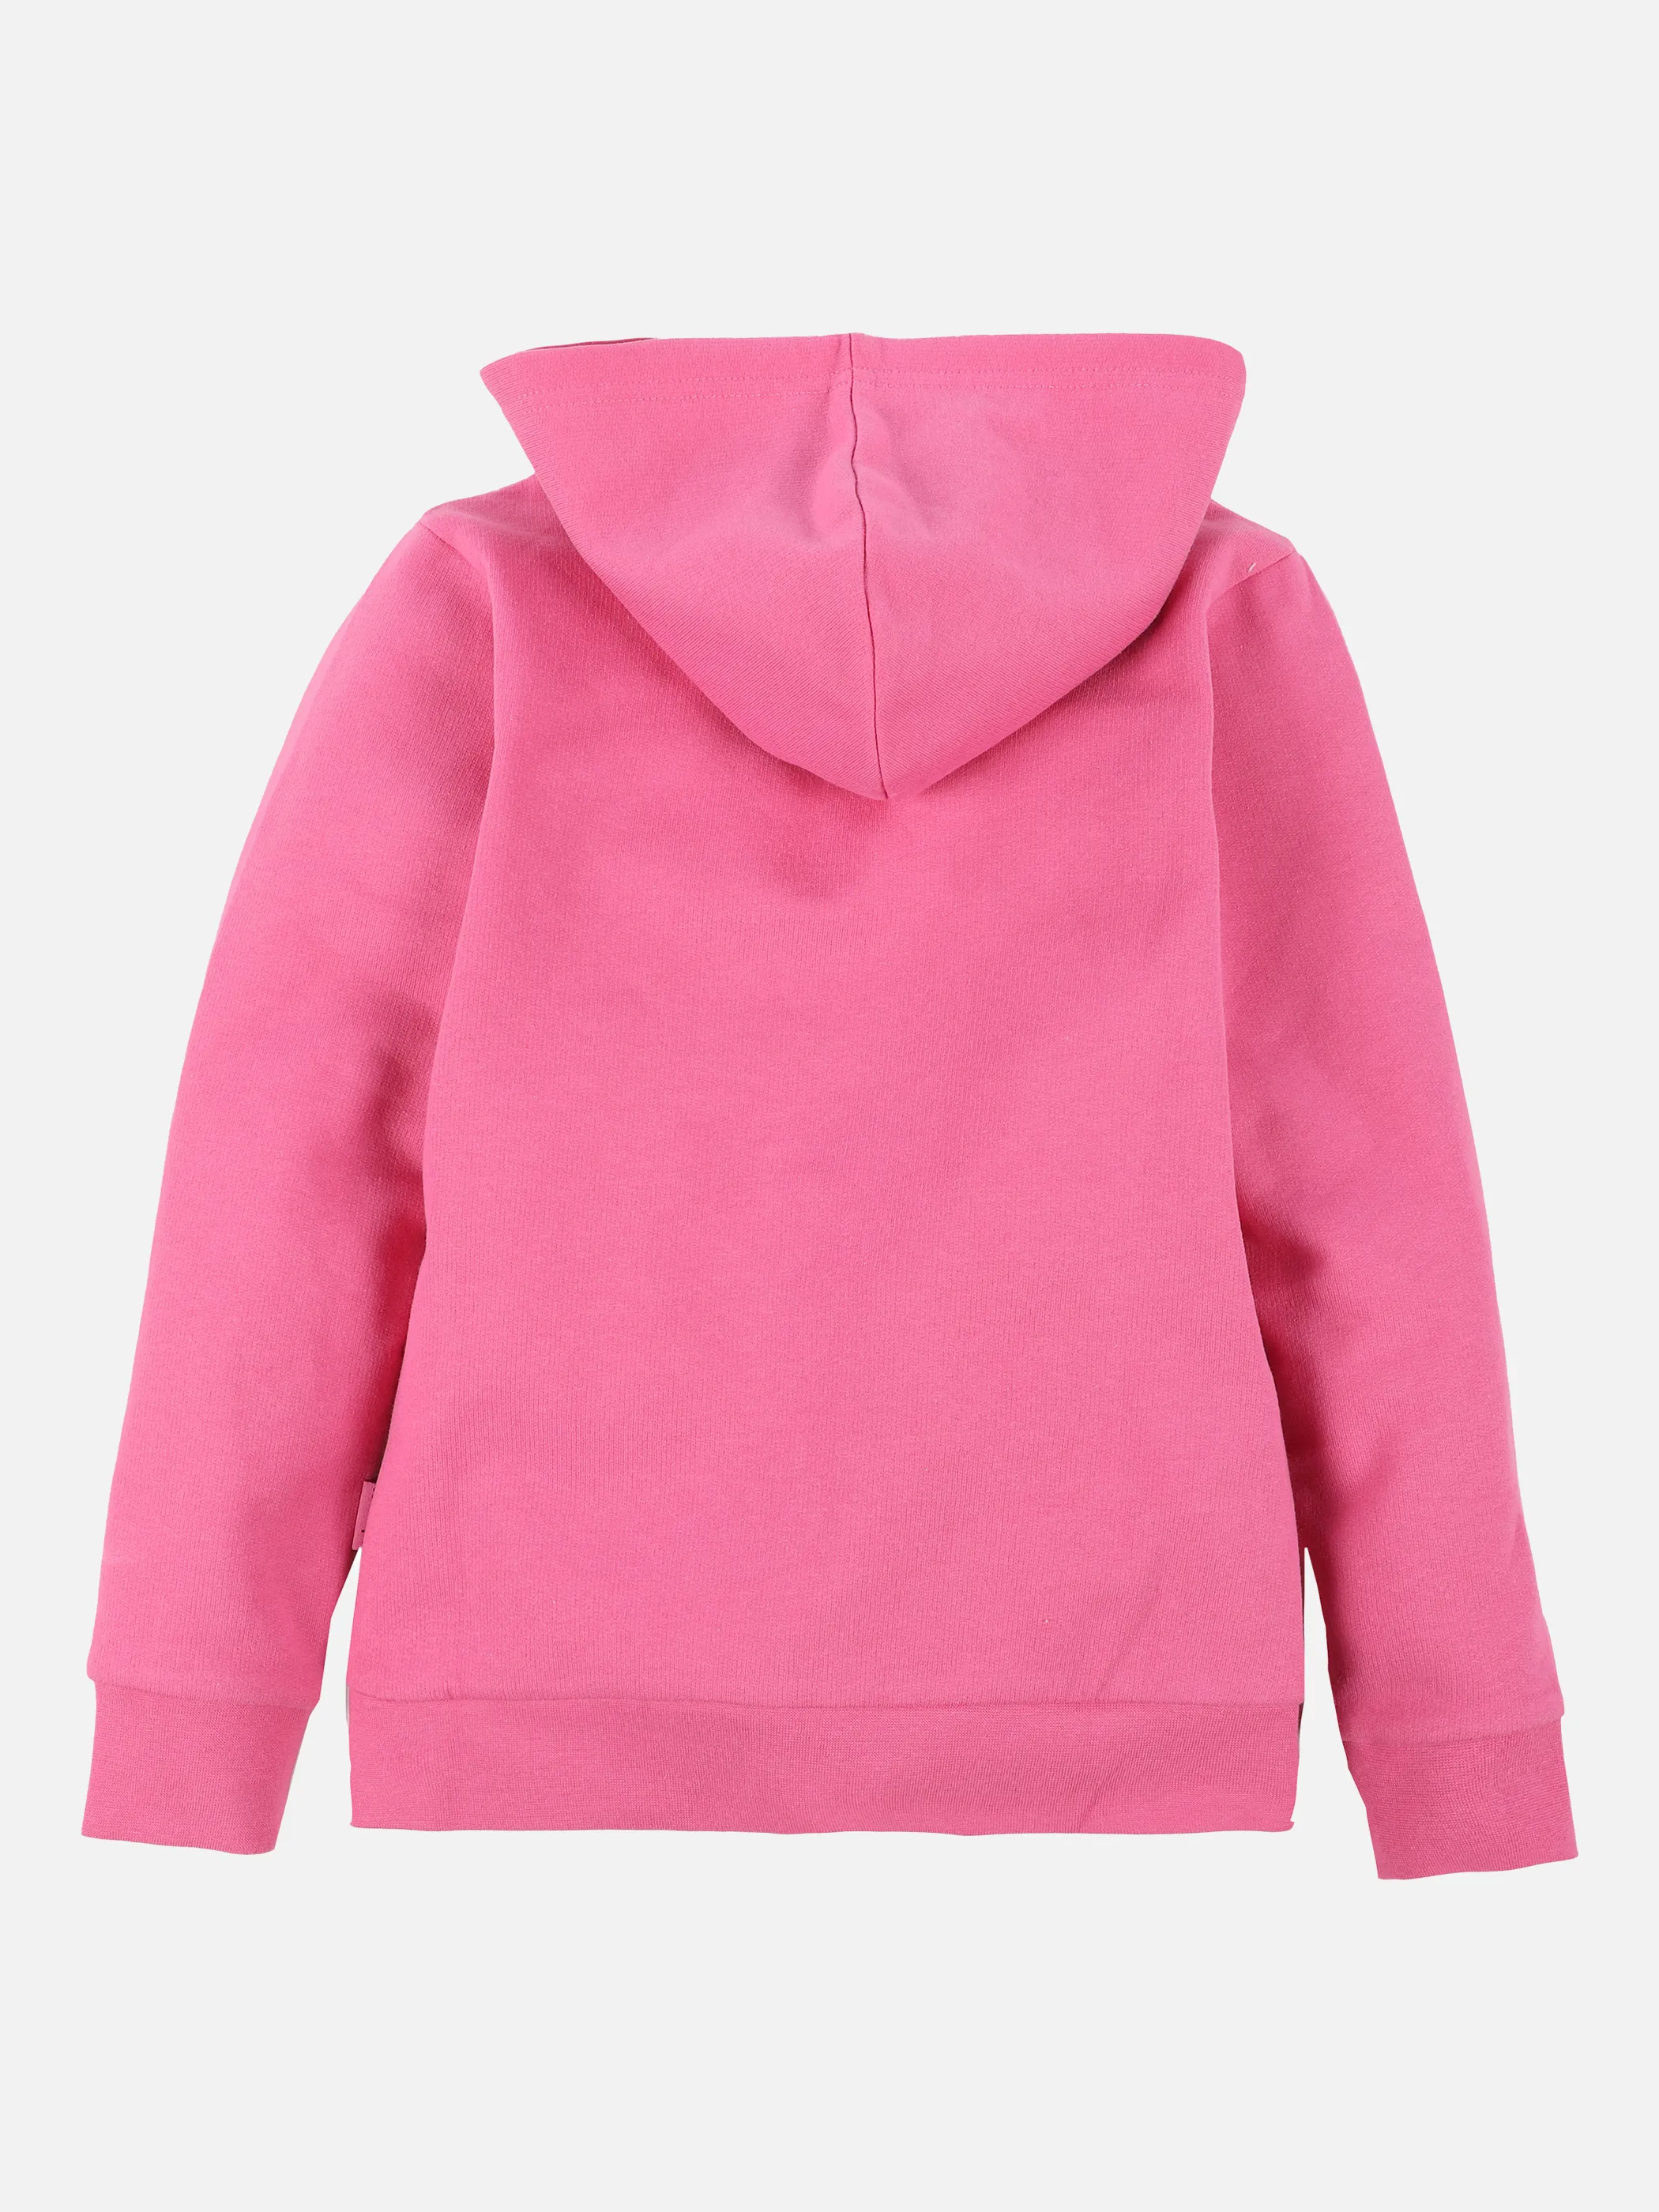 Stop + Go MG-Sportjacke Pink 873774 PINK 2